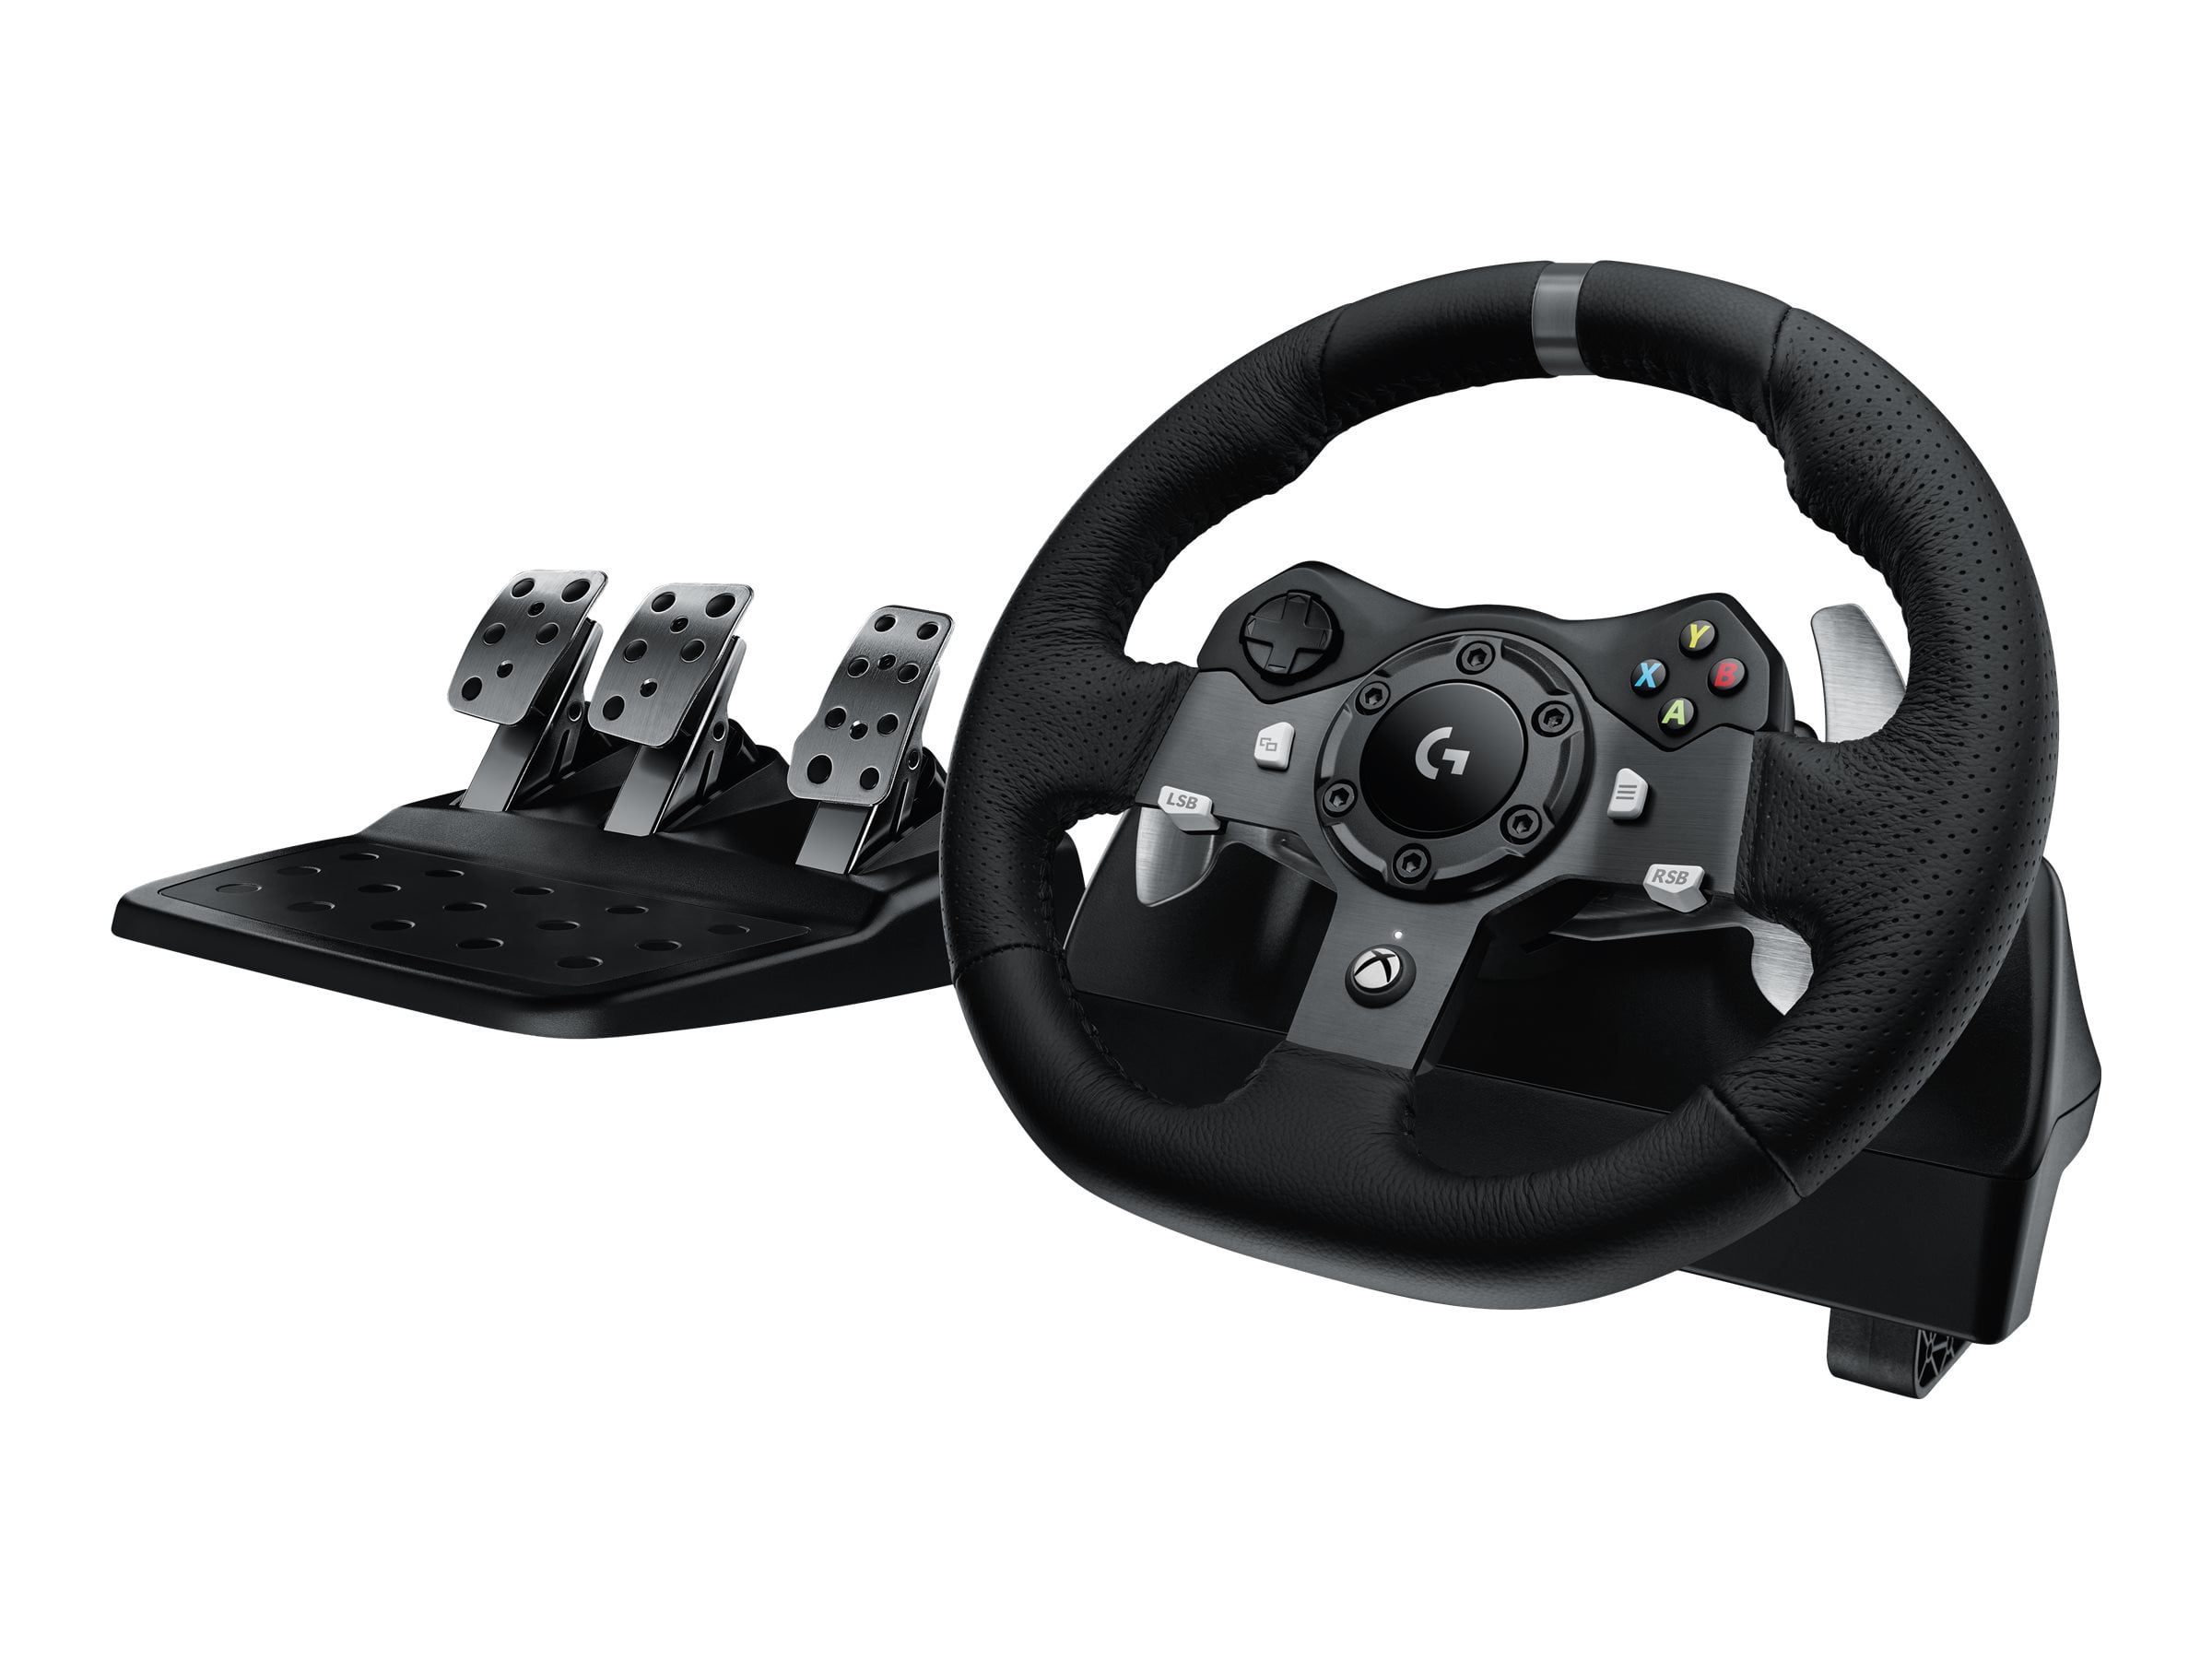 disharmoni Idol solnedgang Logitech G920 Driving Force Racing Wheel for Xbox One and Windows - Black  (New in Non-Retail Packaging) - Walmart.com